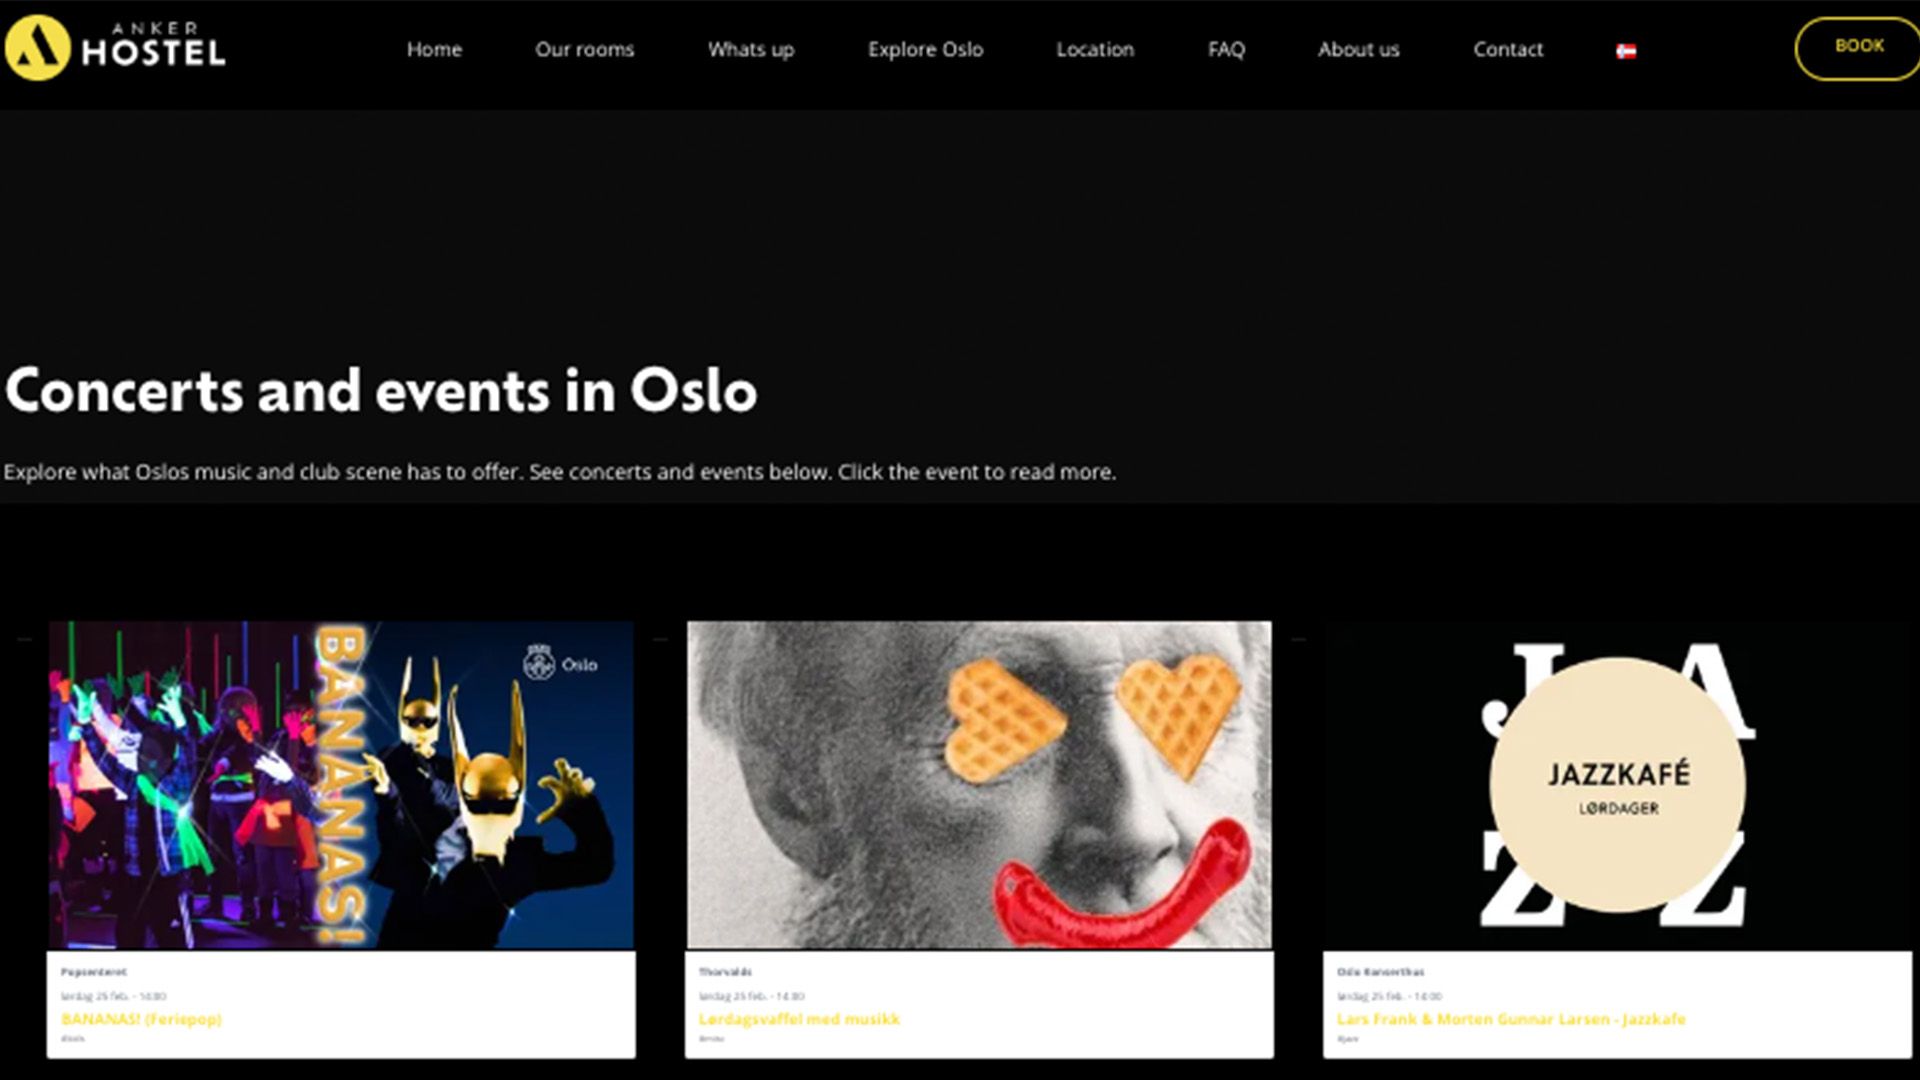 Cover Image for Anker Hostel is broadcasting events on their website!